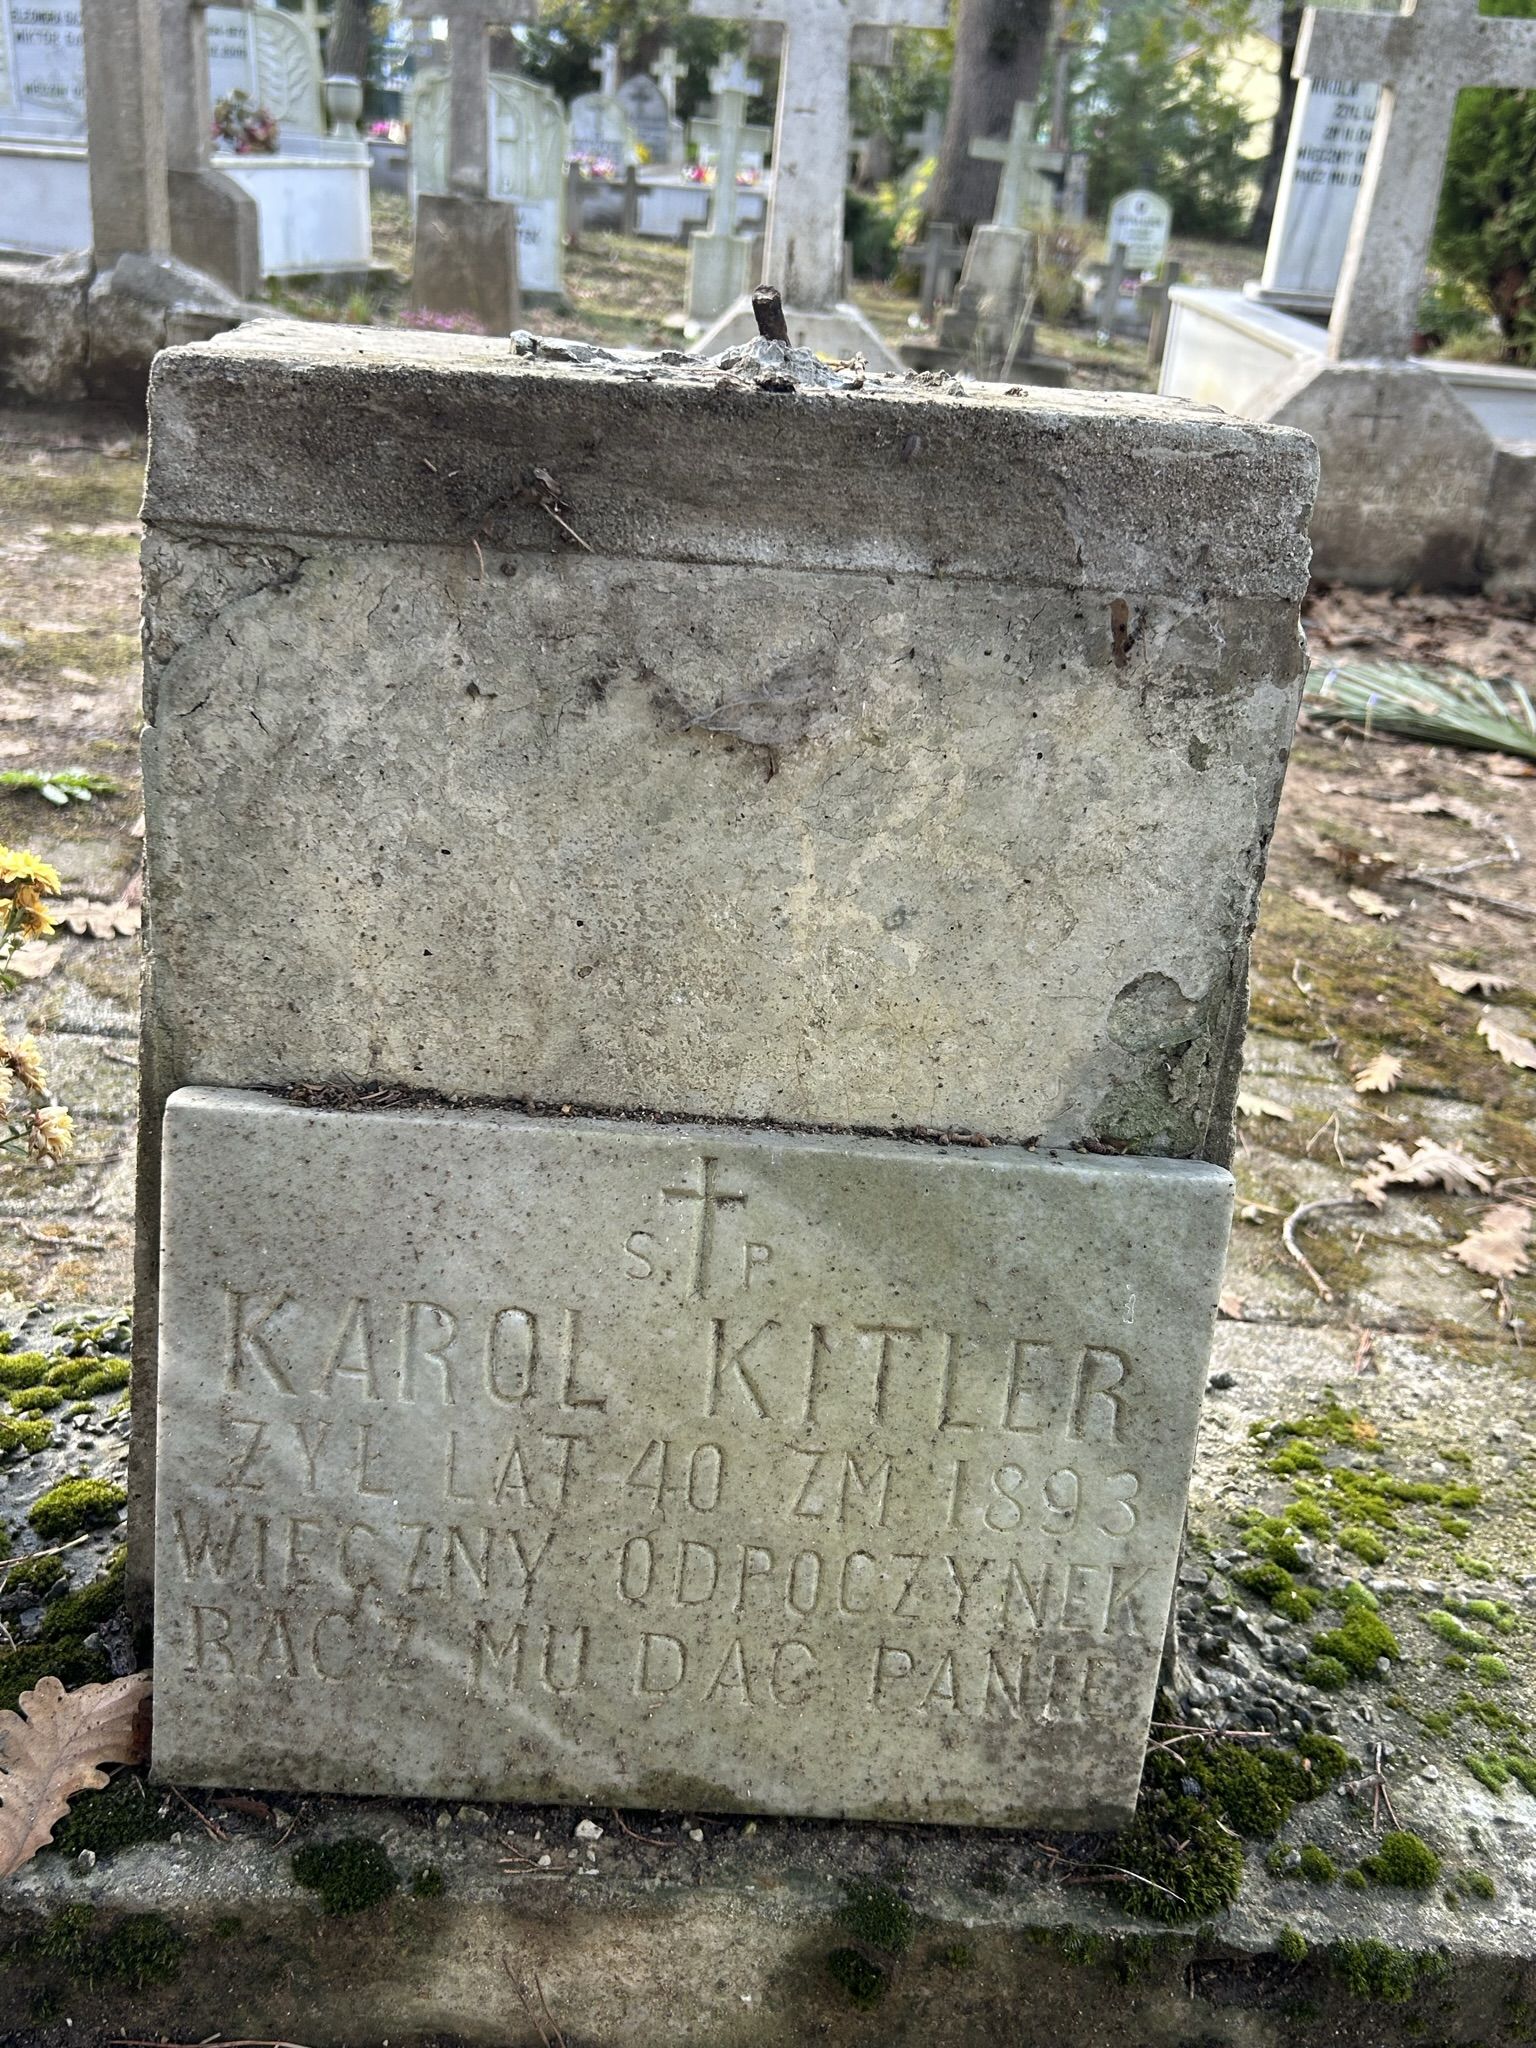 Inscription from the tombstone of Karol Kitler, Catholic cemetery in Adampol